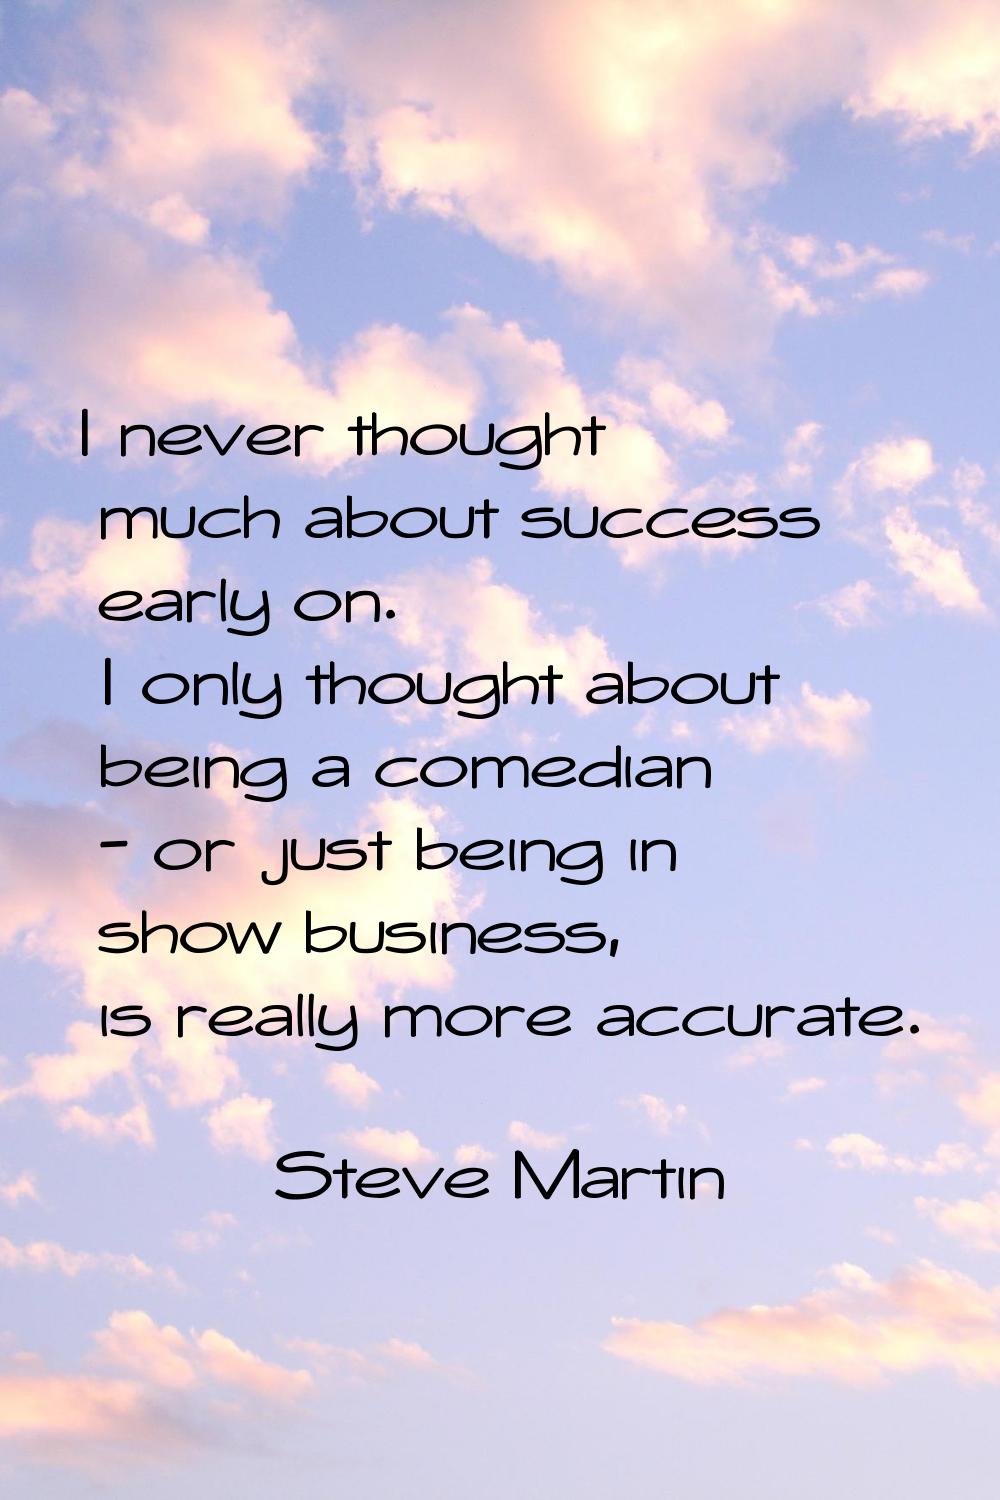 I never thought much about success early on. I only thought about being a comedian - or just being 